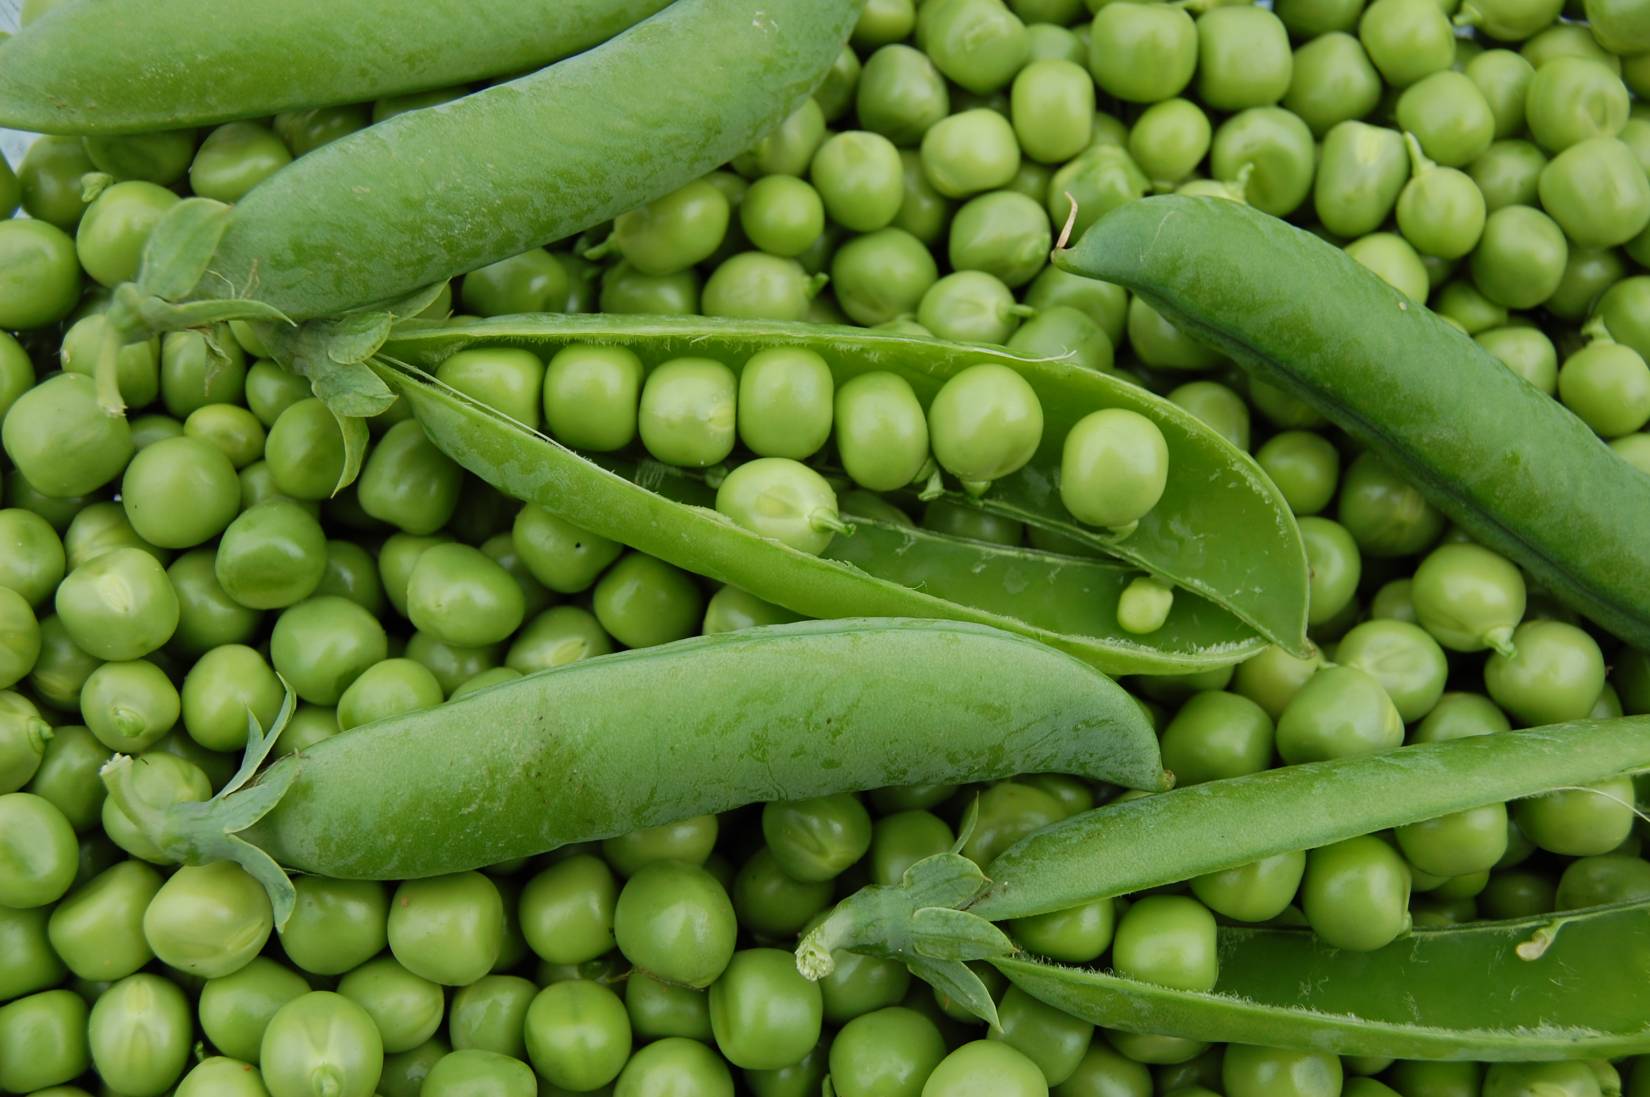 The pea genome assembled for the first time